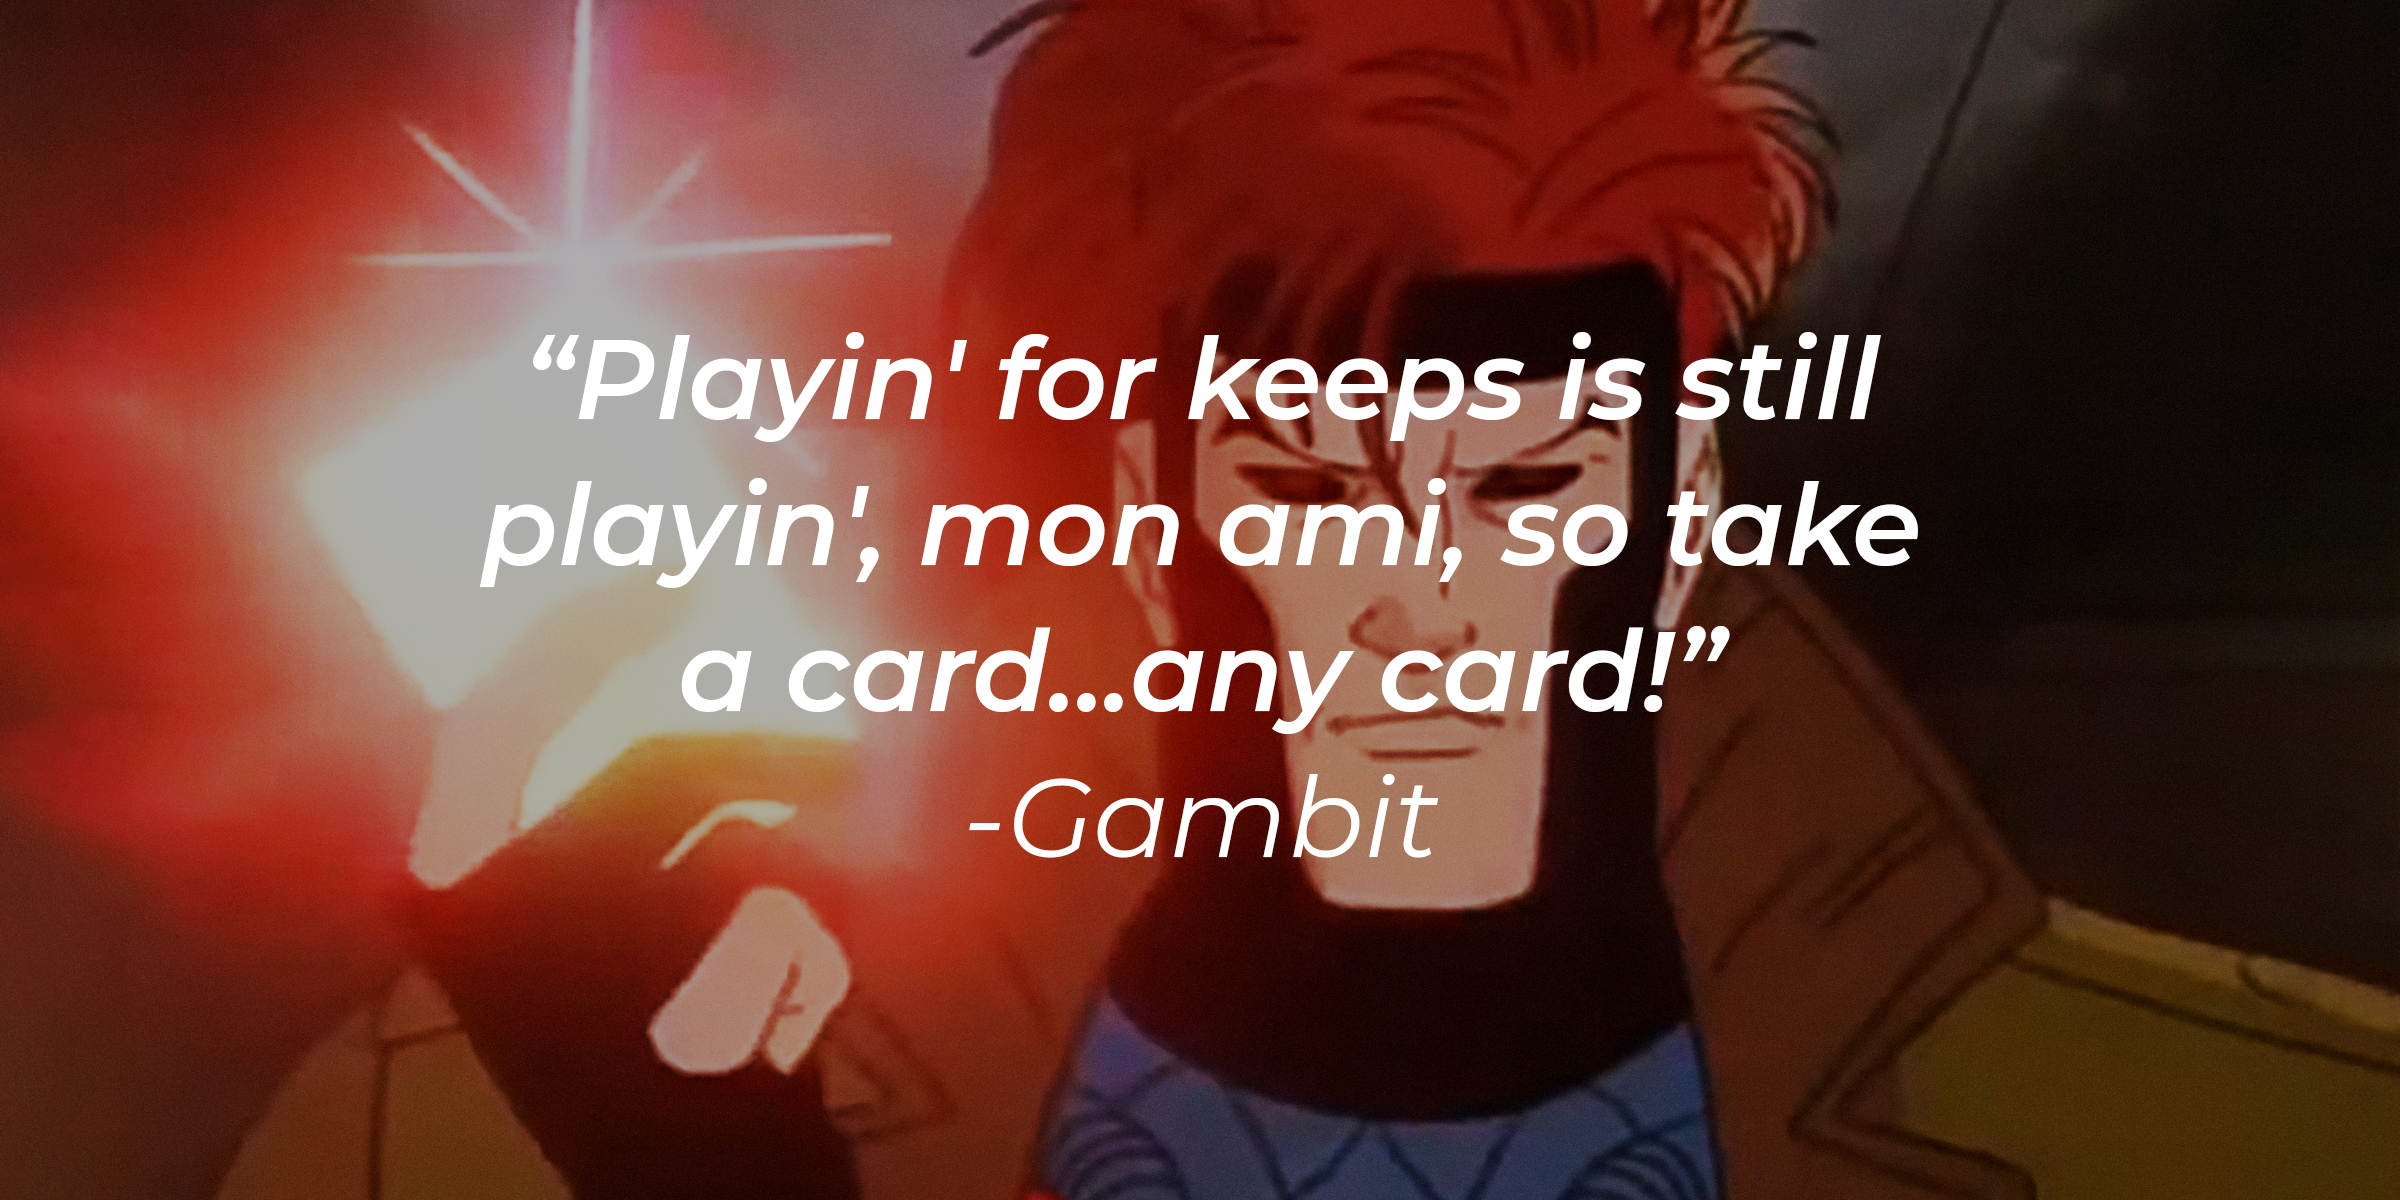 An image of Gambit, with his quote: "Playin' for keeps is still playin', mon ami, so take a card...any card!" | Source: Fox Kids Network